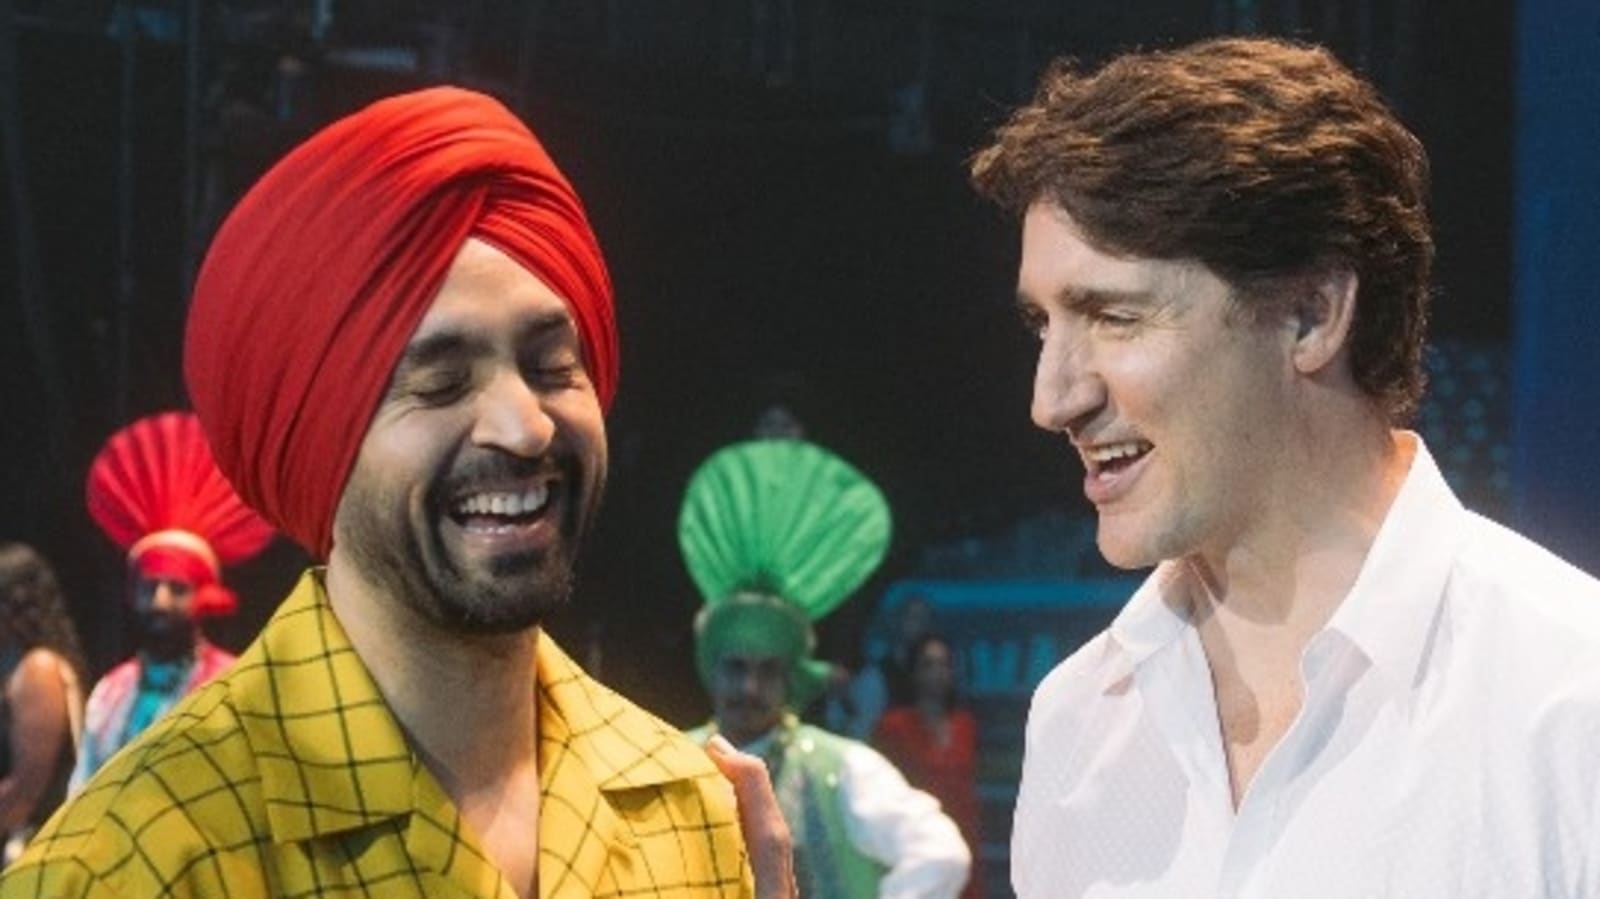 Diljit Dosanjh gets surprise visit from Justin Trudeau at sold-out Canada concert, duo cheer ‘Punjabi aa gaye oye’